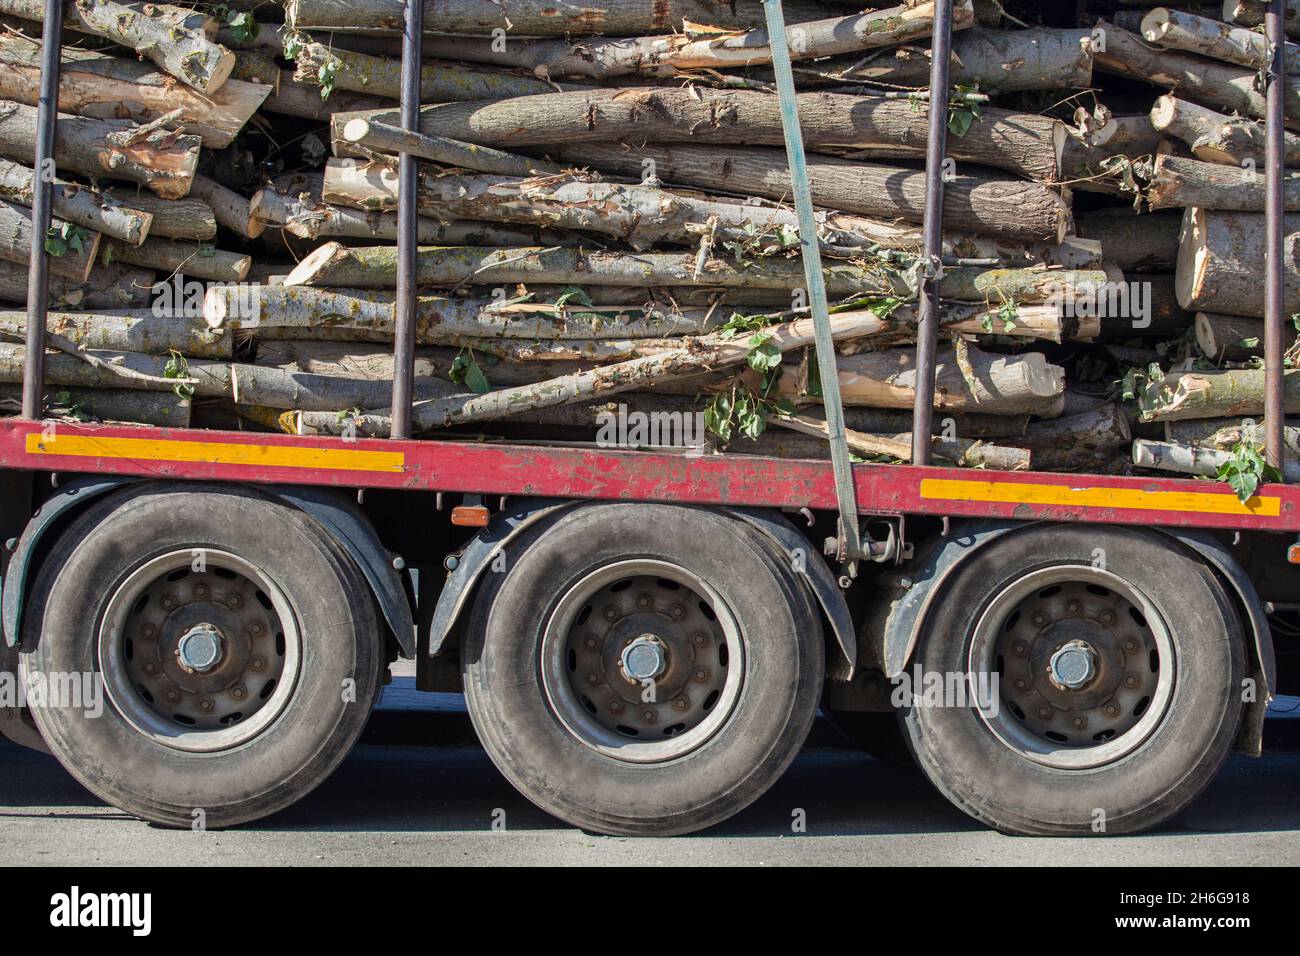 Truck trailer overloaded with riverside tree logs. Truck weight restrictions concept Stock Photo